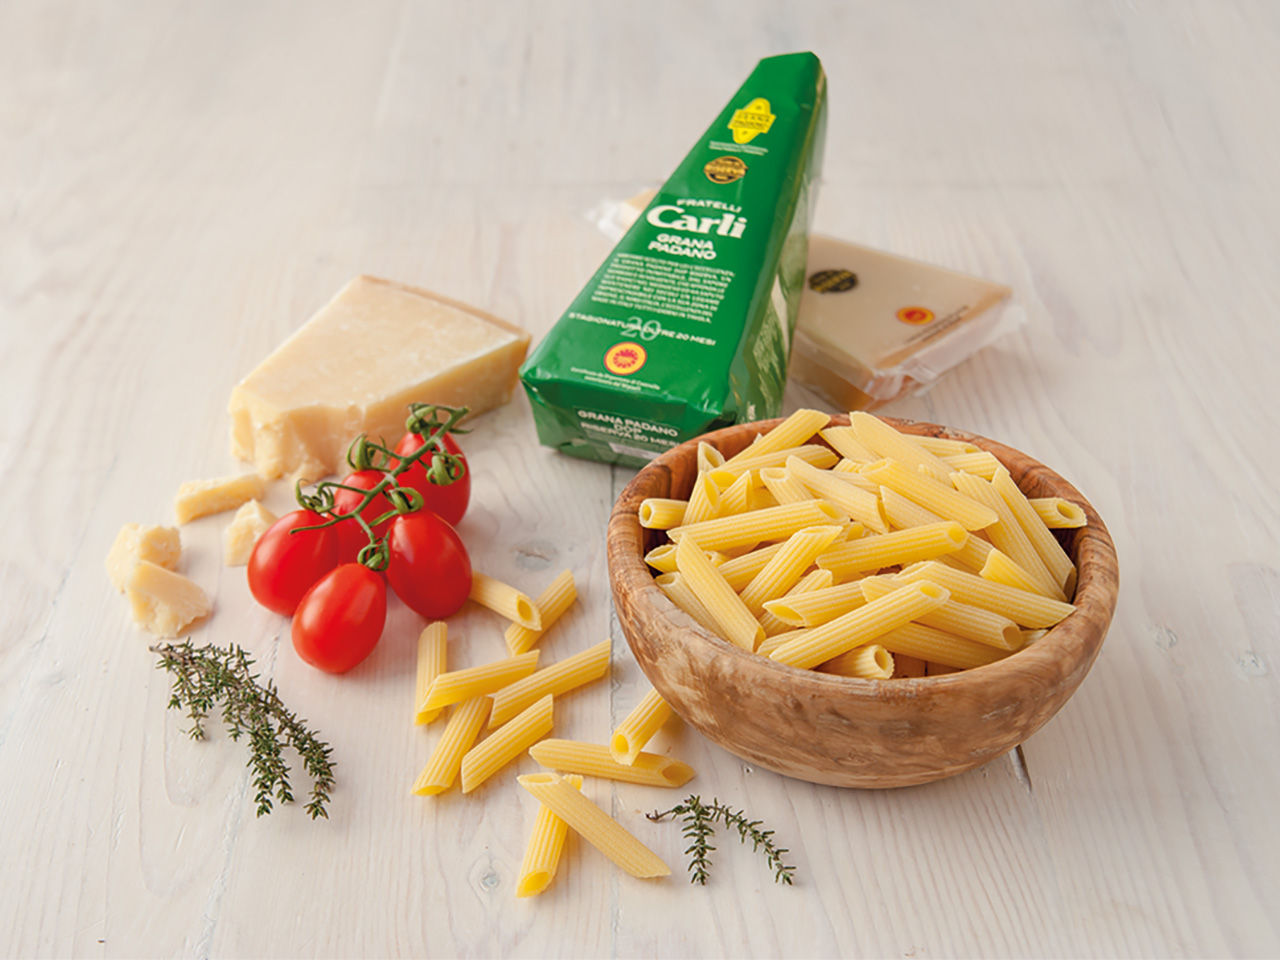 penne and other ingredients